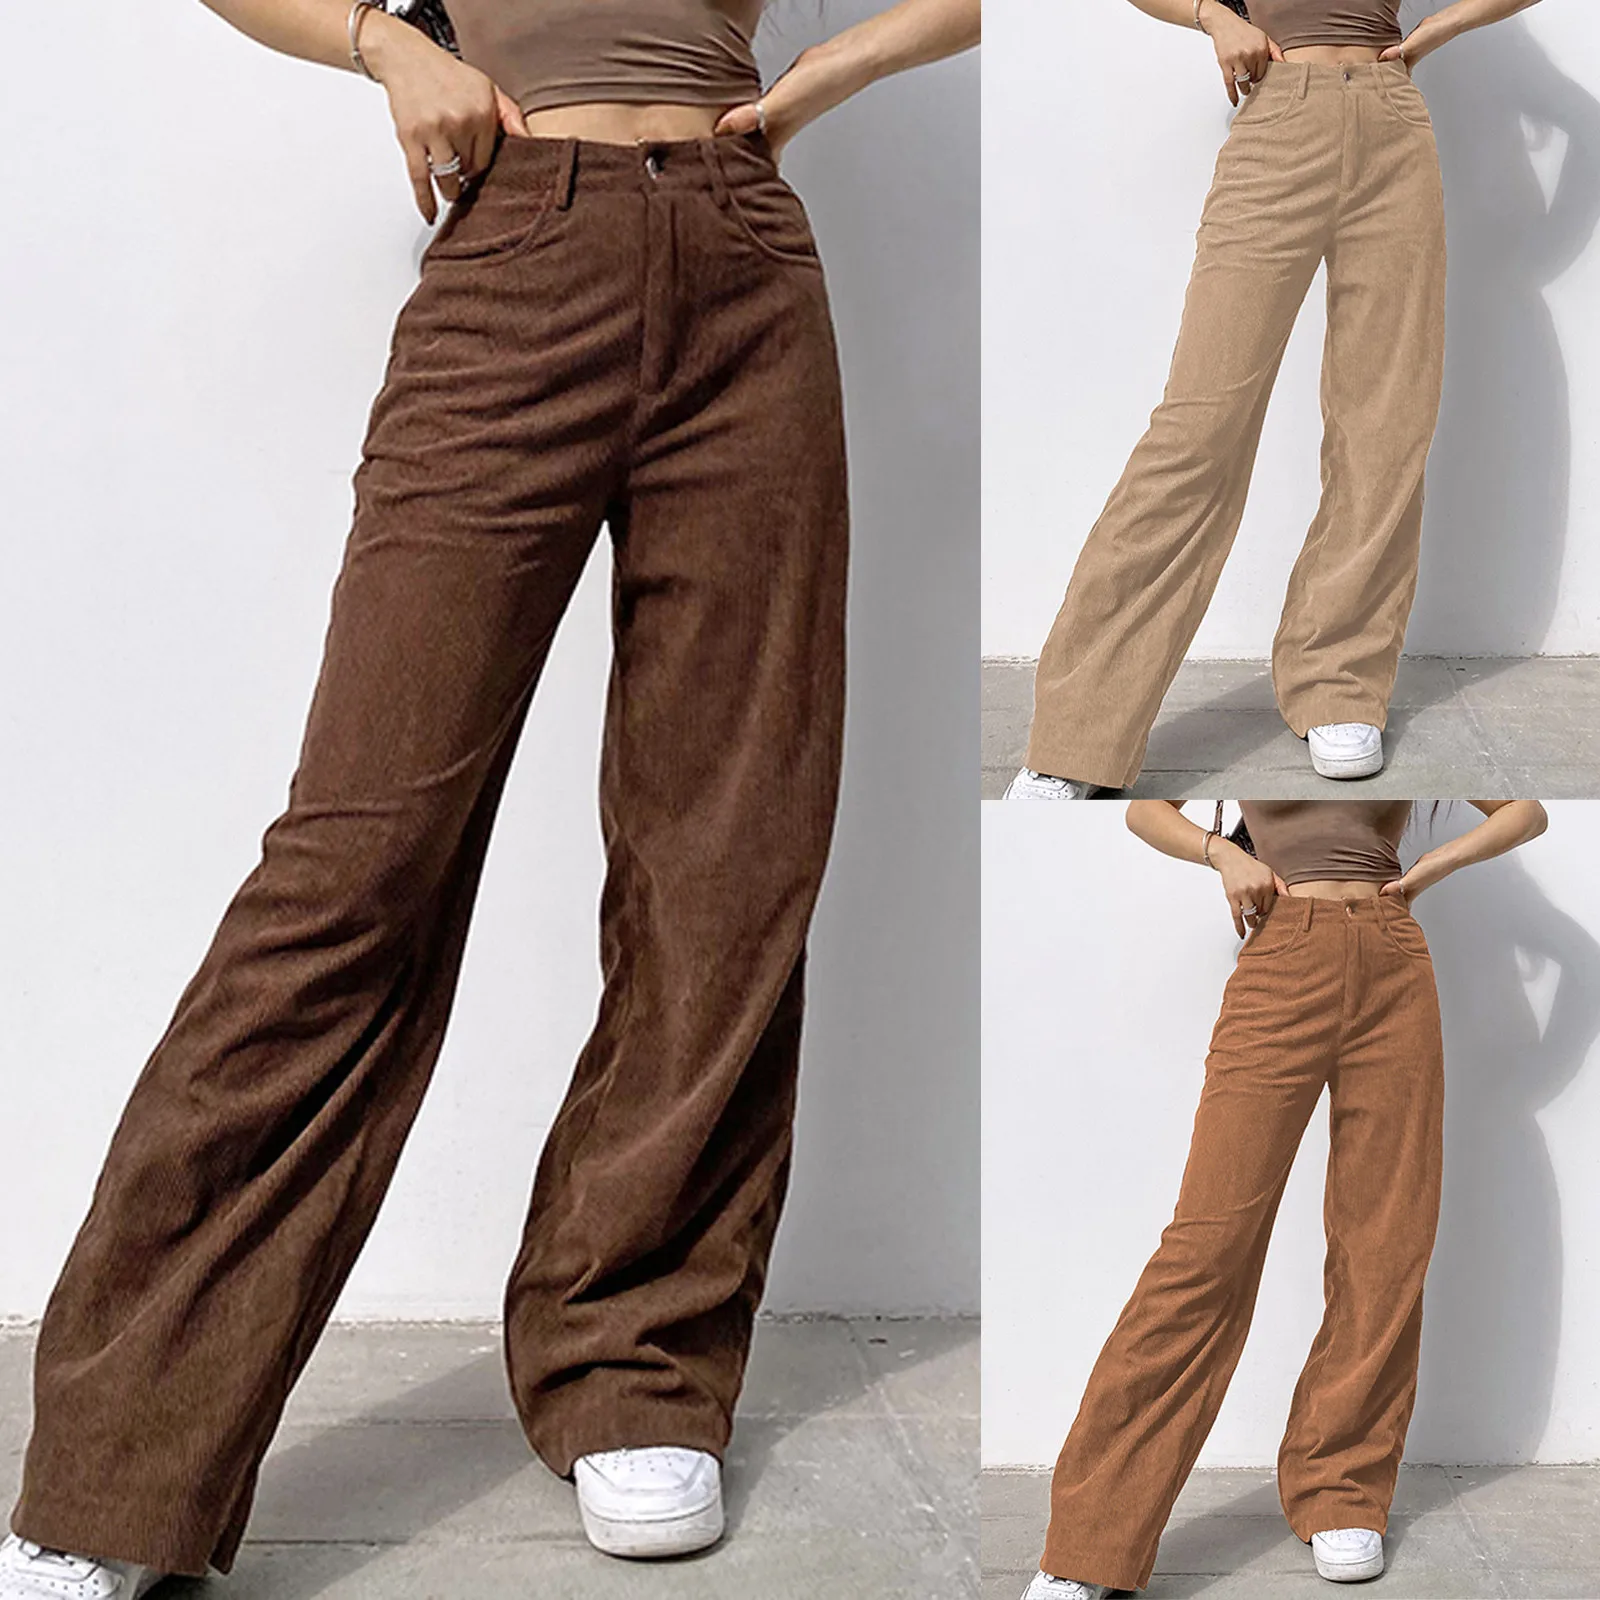 Women's Fashion Jeans Women’s Solid Mid Waisted Wide Leg Pants Straight Casual Baggy Trousers Vintage Streetwear Mom |